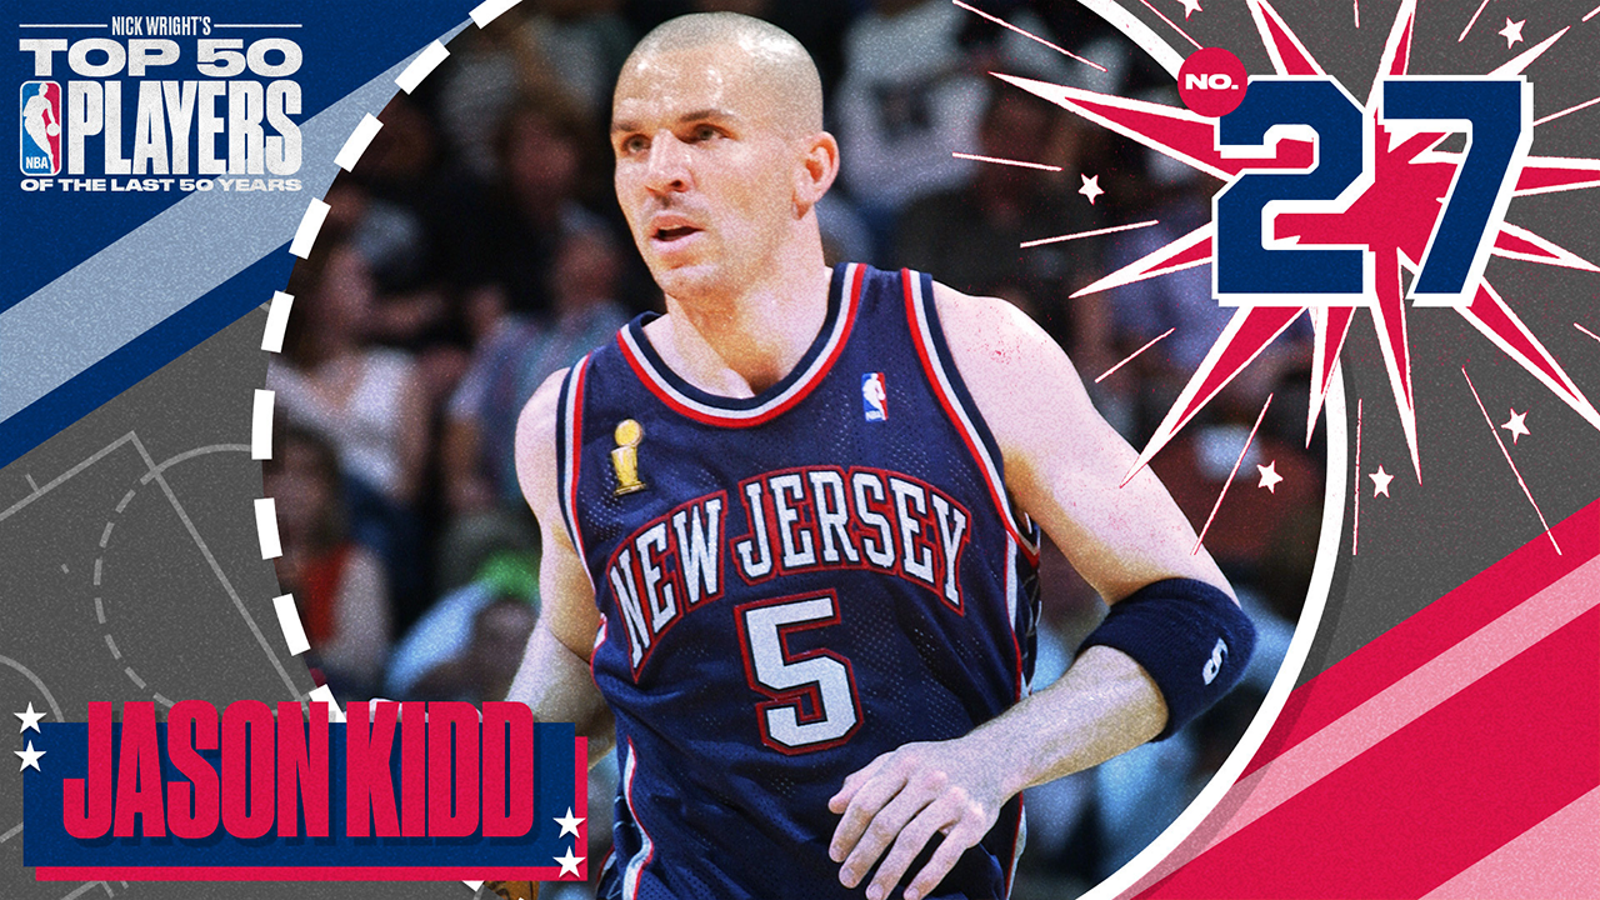 Jason Kidd is No. 27 on Nick Wright's Top 50 NBA Players of the Last 50 Years